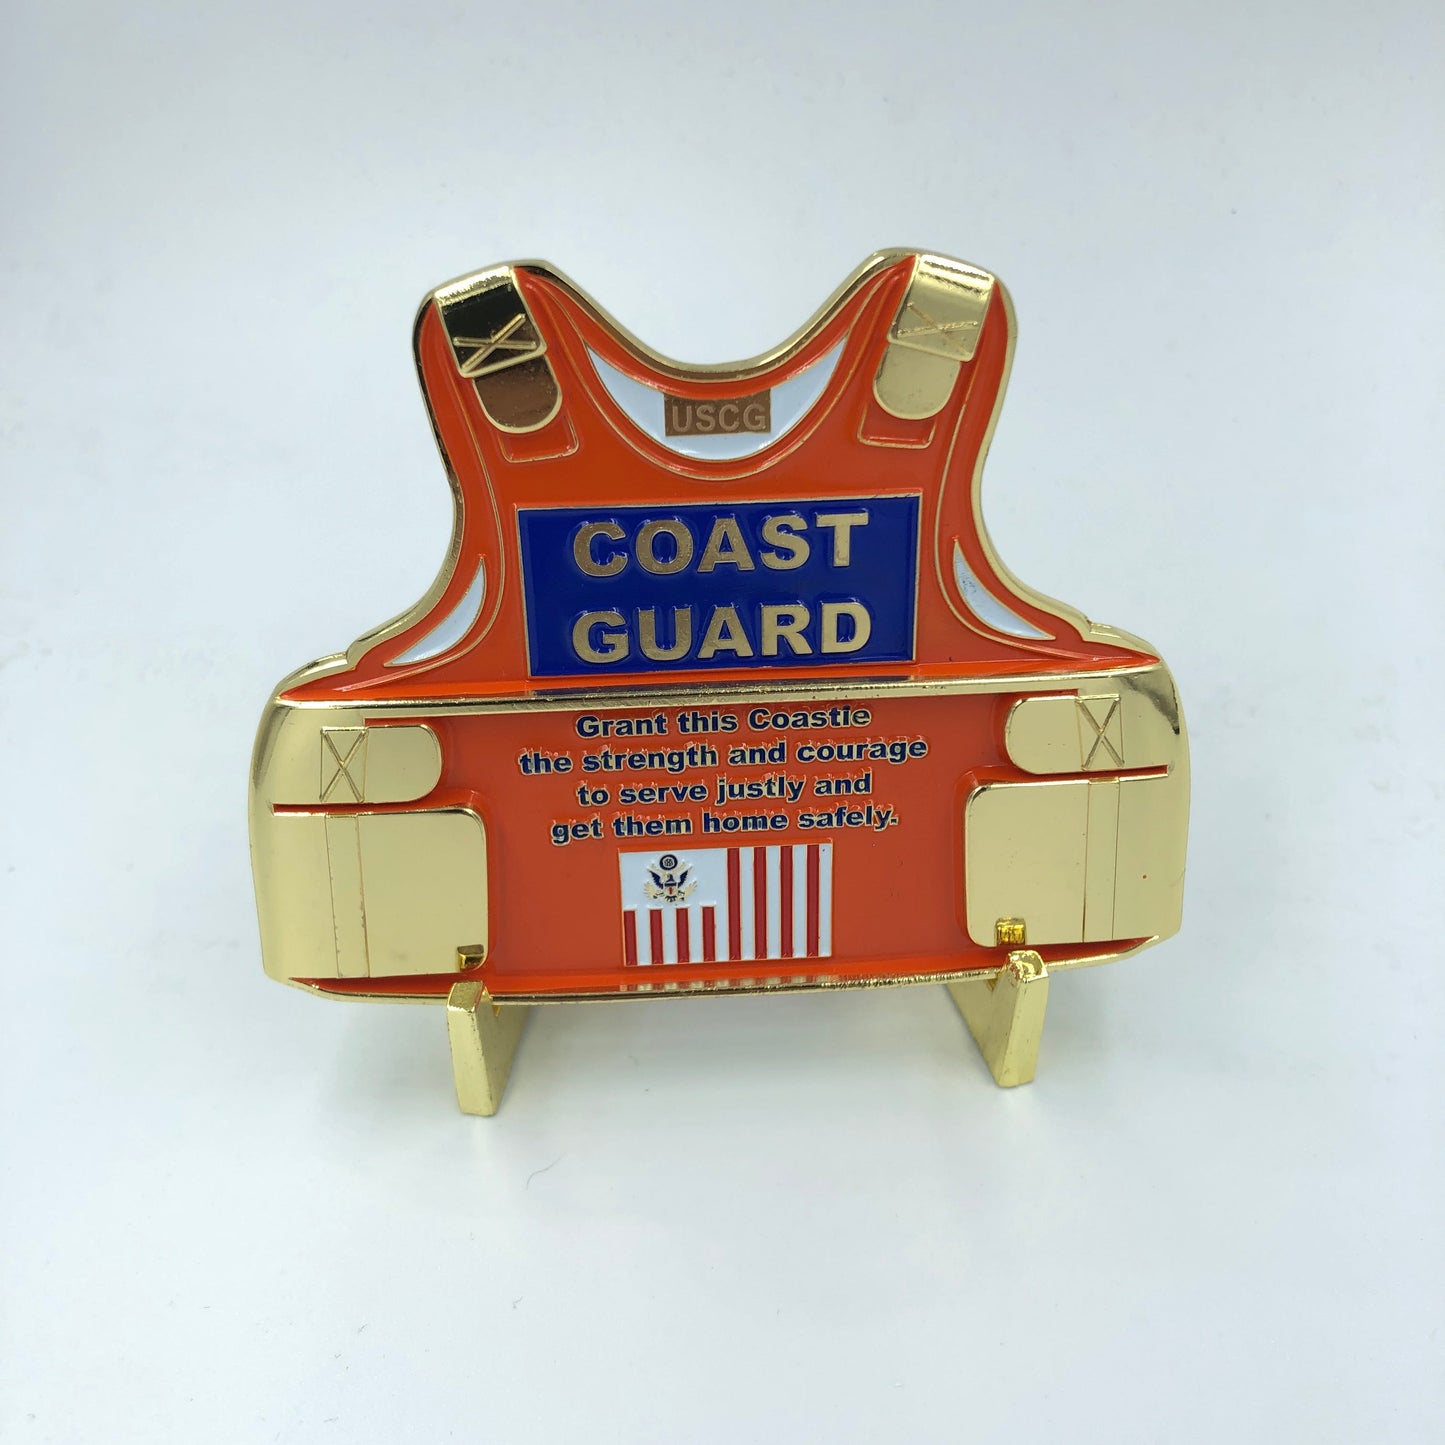 Coast Guard Set: Coastie Body Armor Medallion and Flag Challenge Coin USCG H-015 and H-016